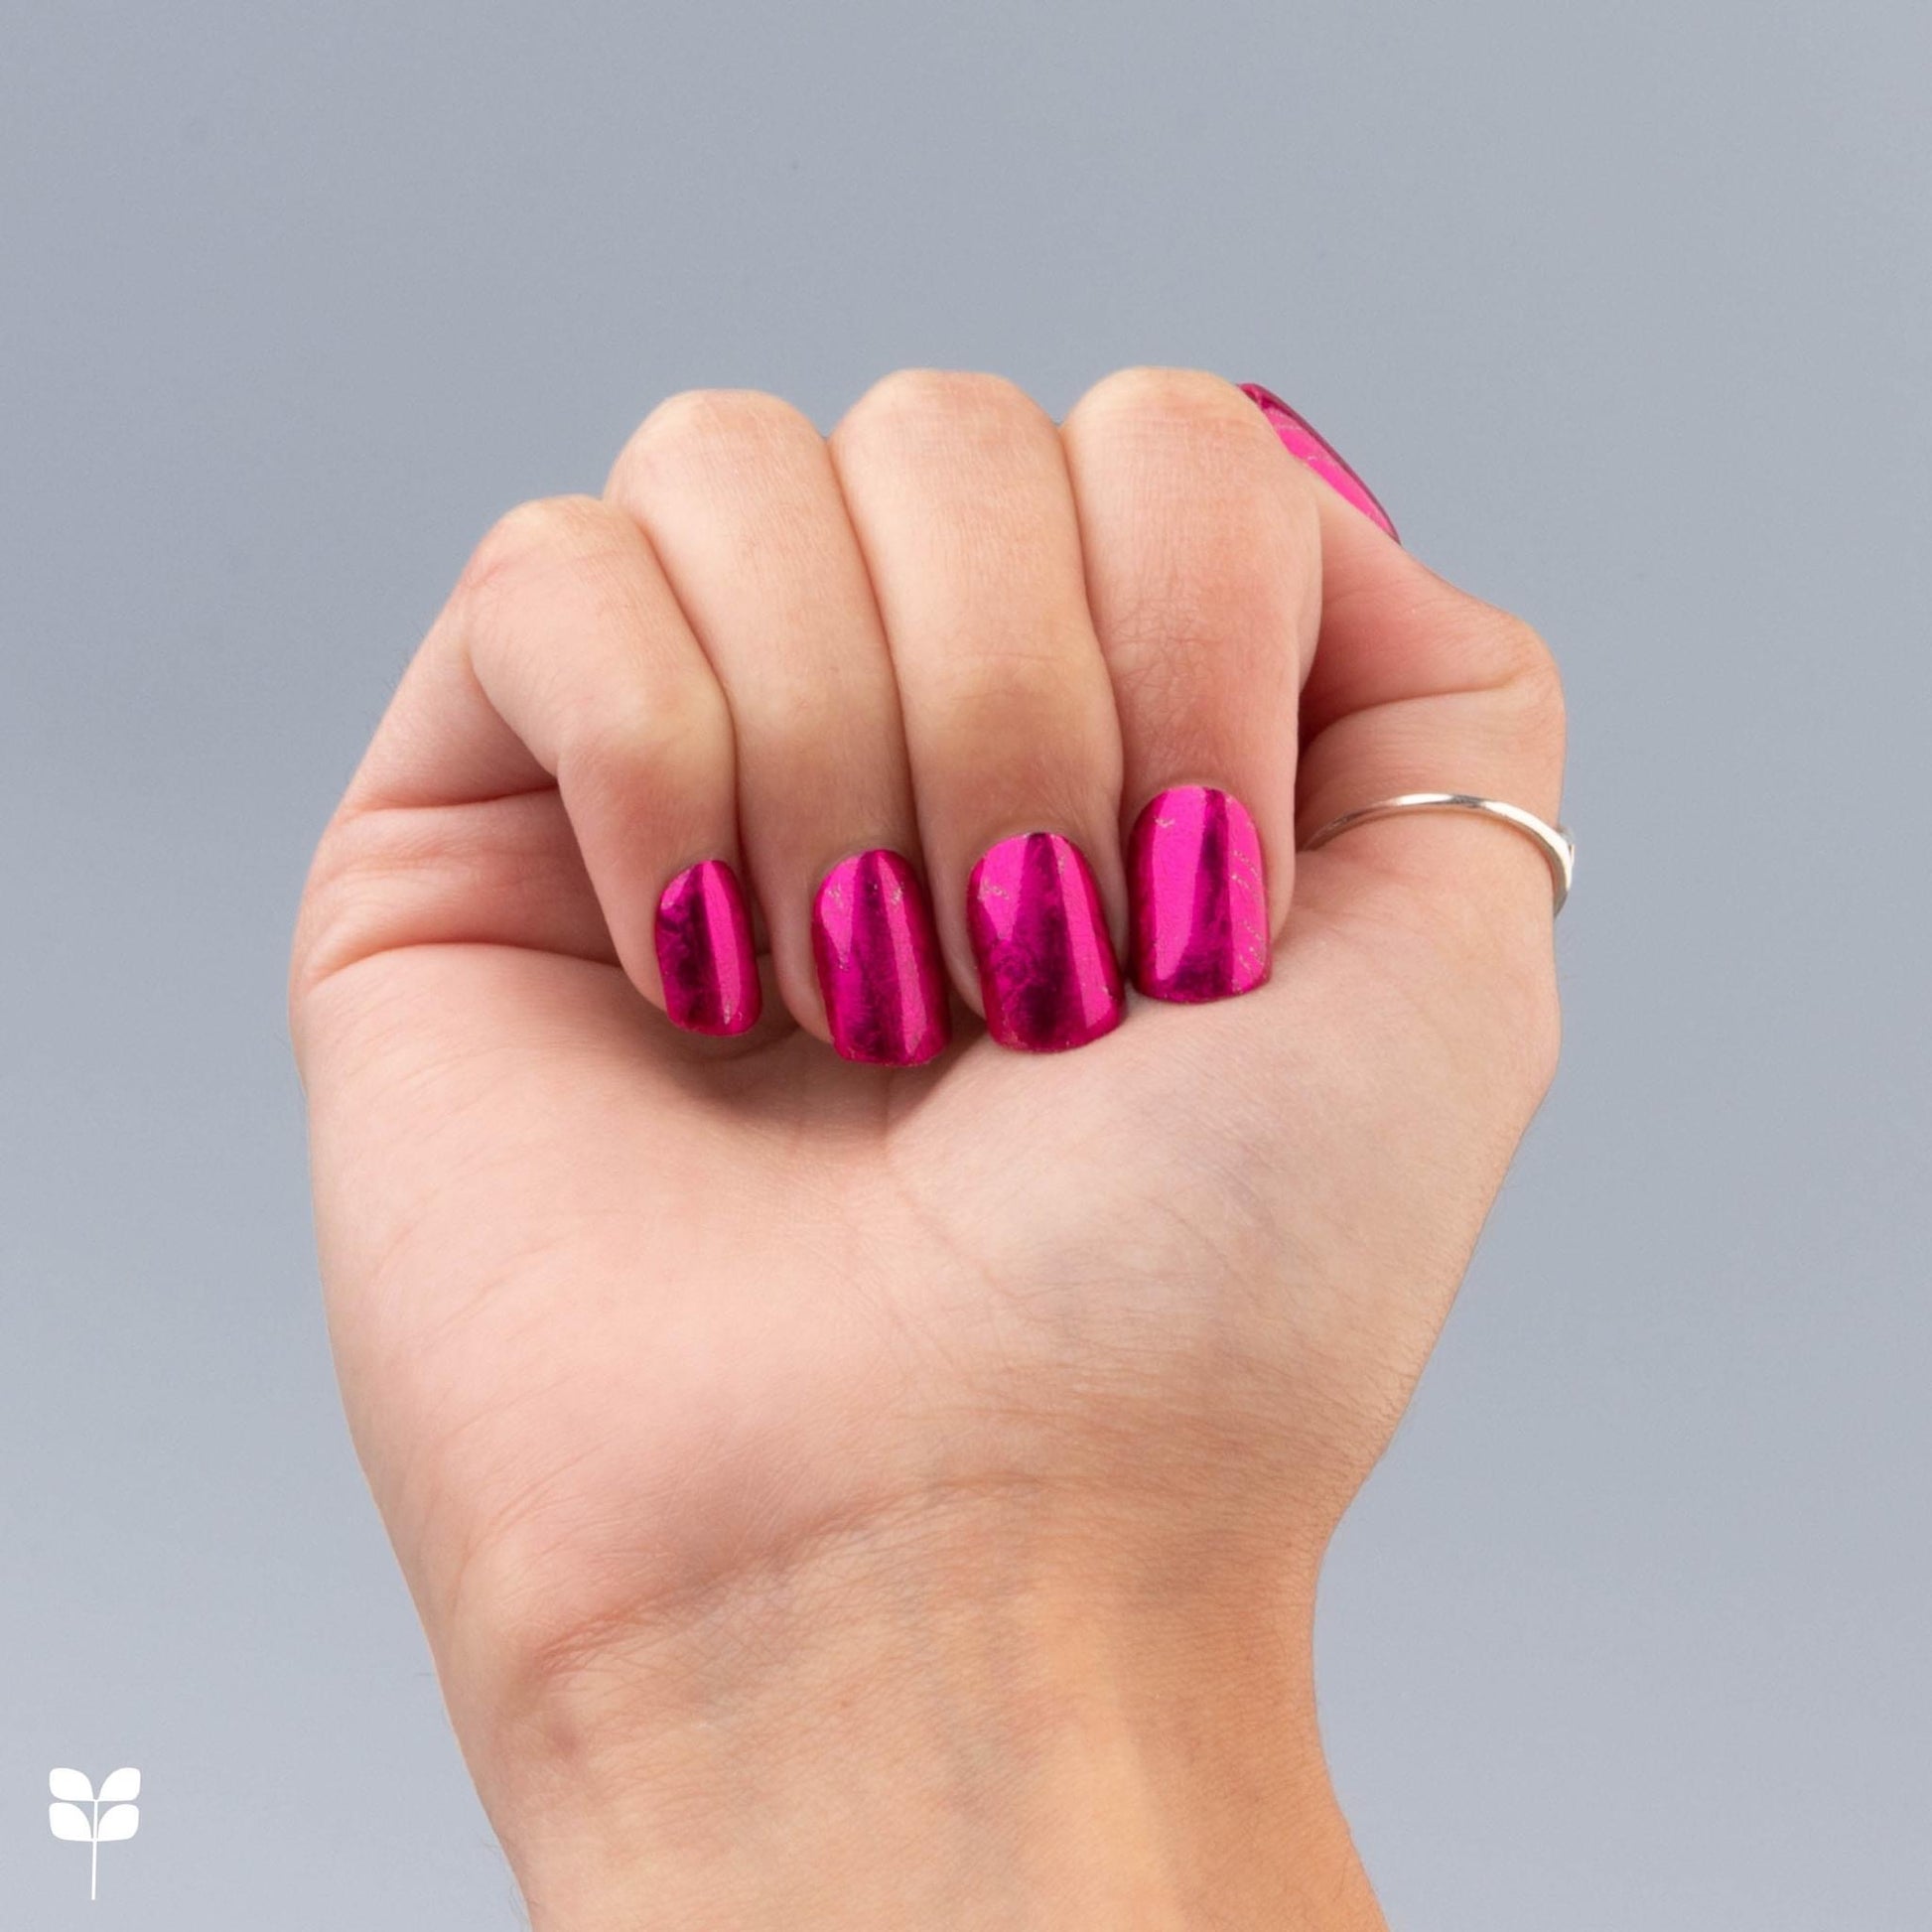 Beautiful manicured nails that last 2 weeks. Metallic hot pink nail accessories